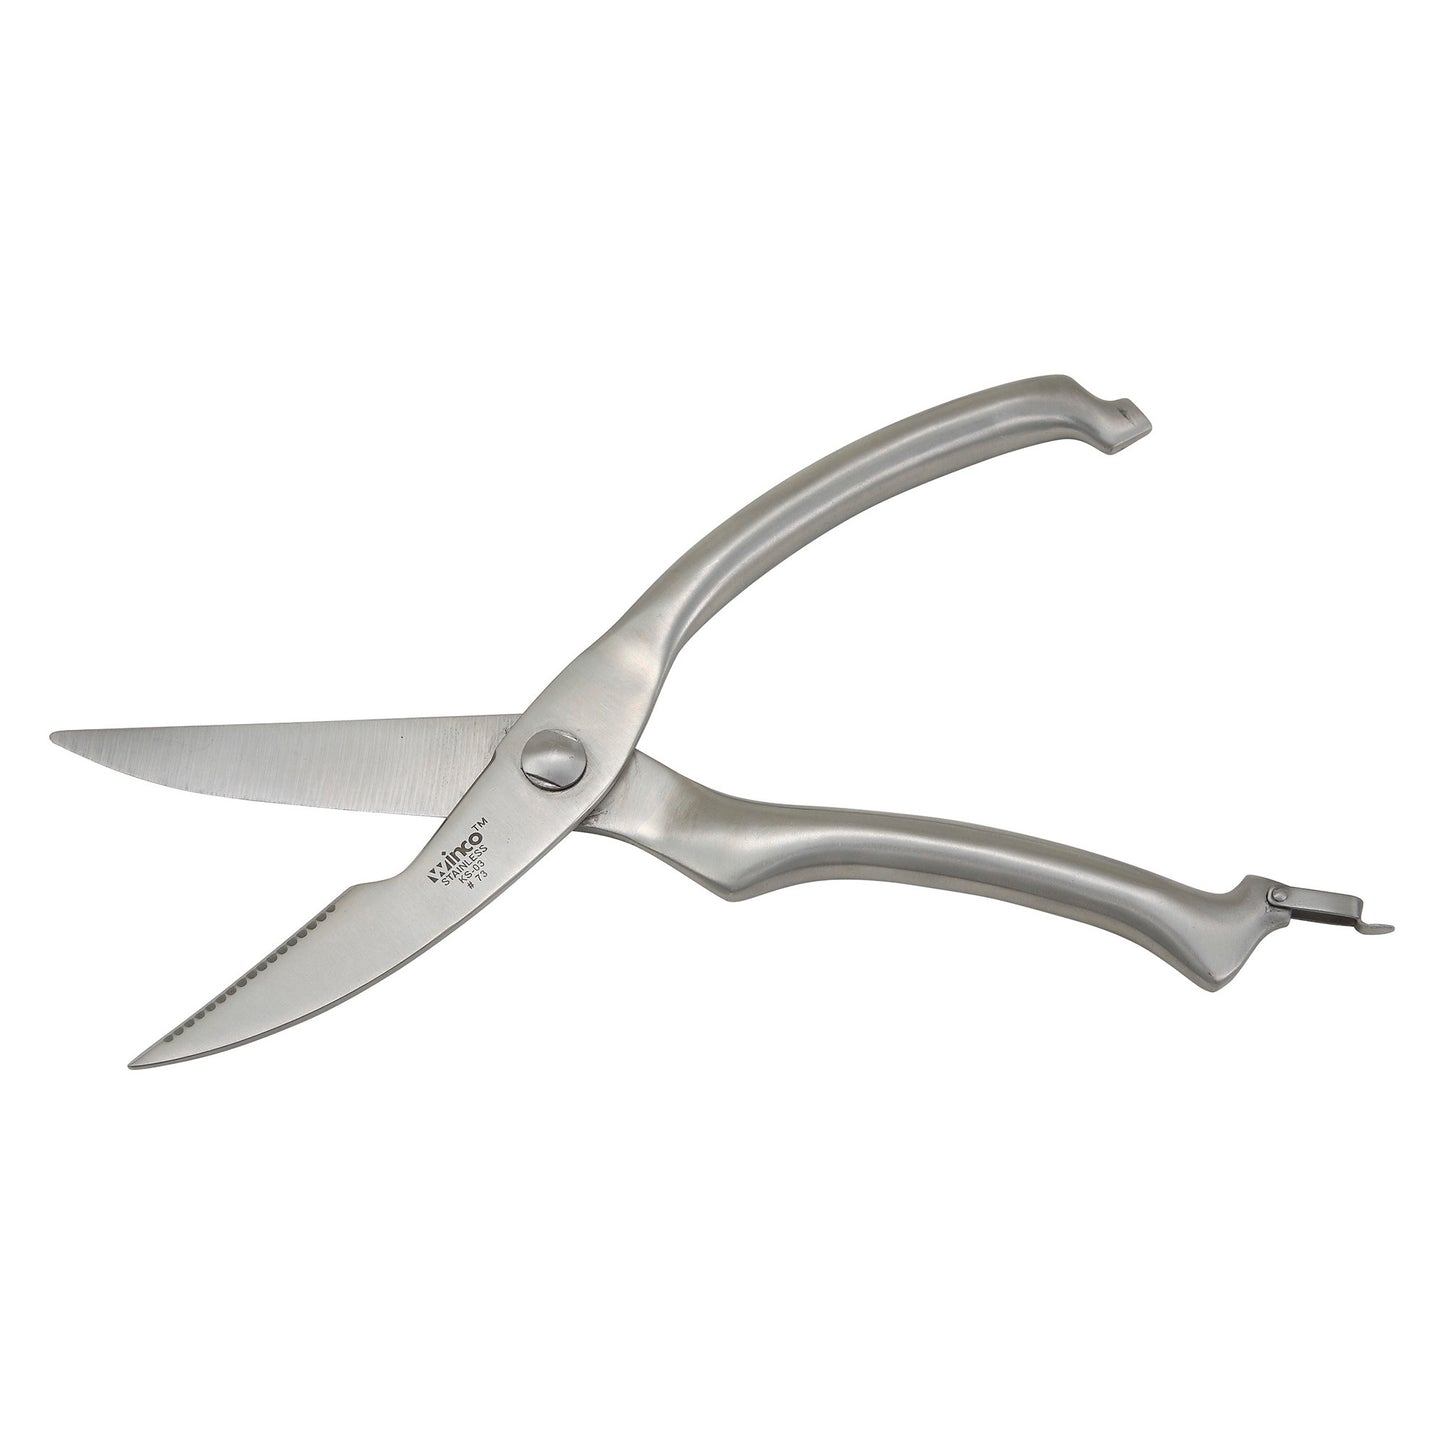 KS-03 - Poultry Shears, Stainless Steel